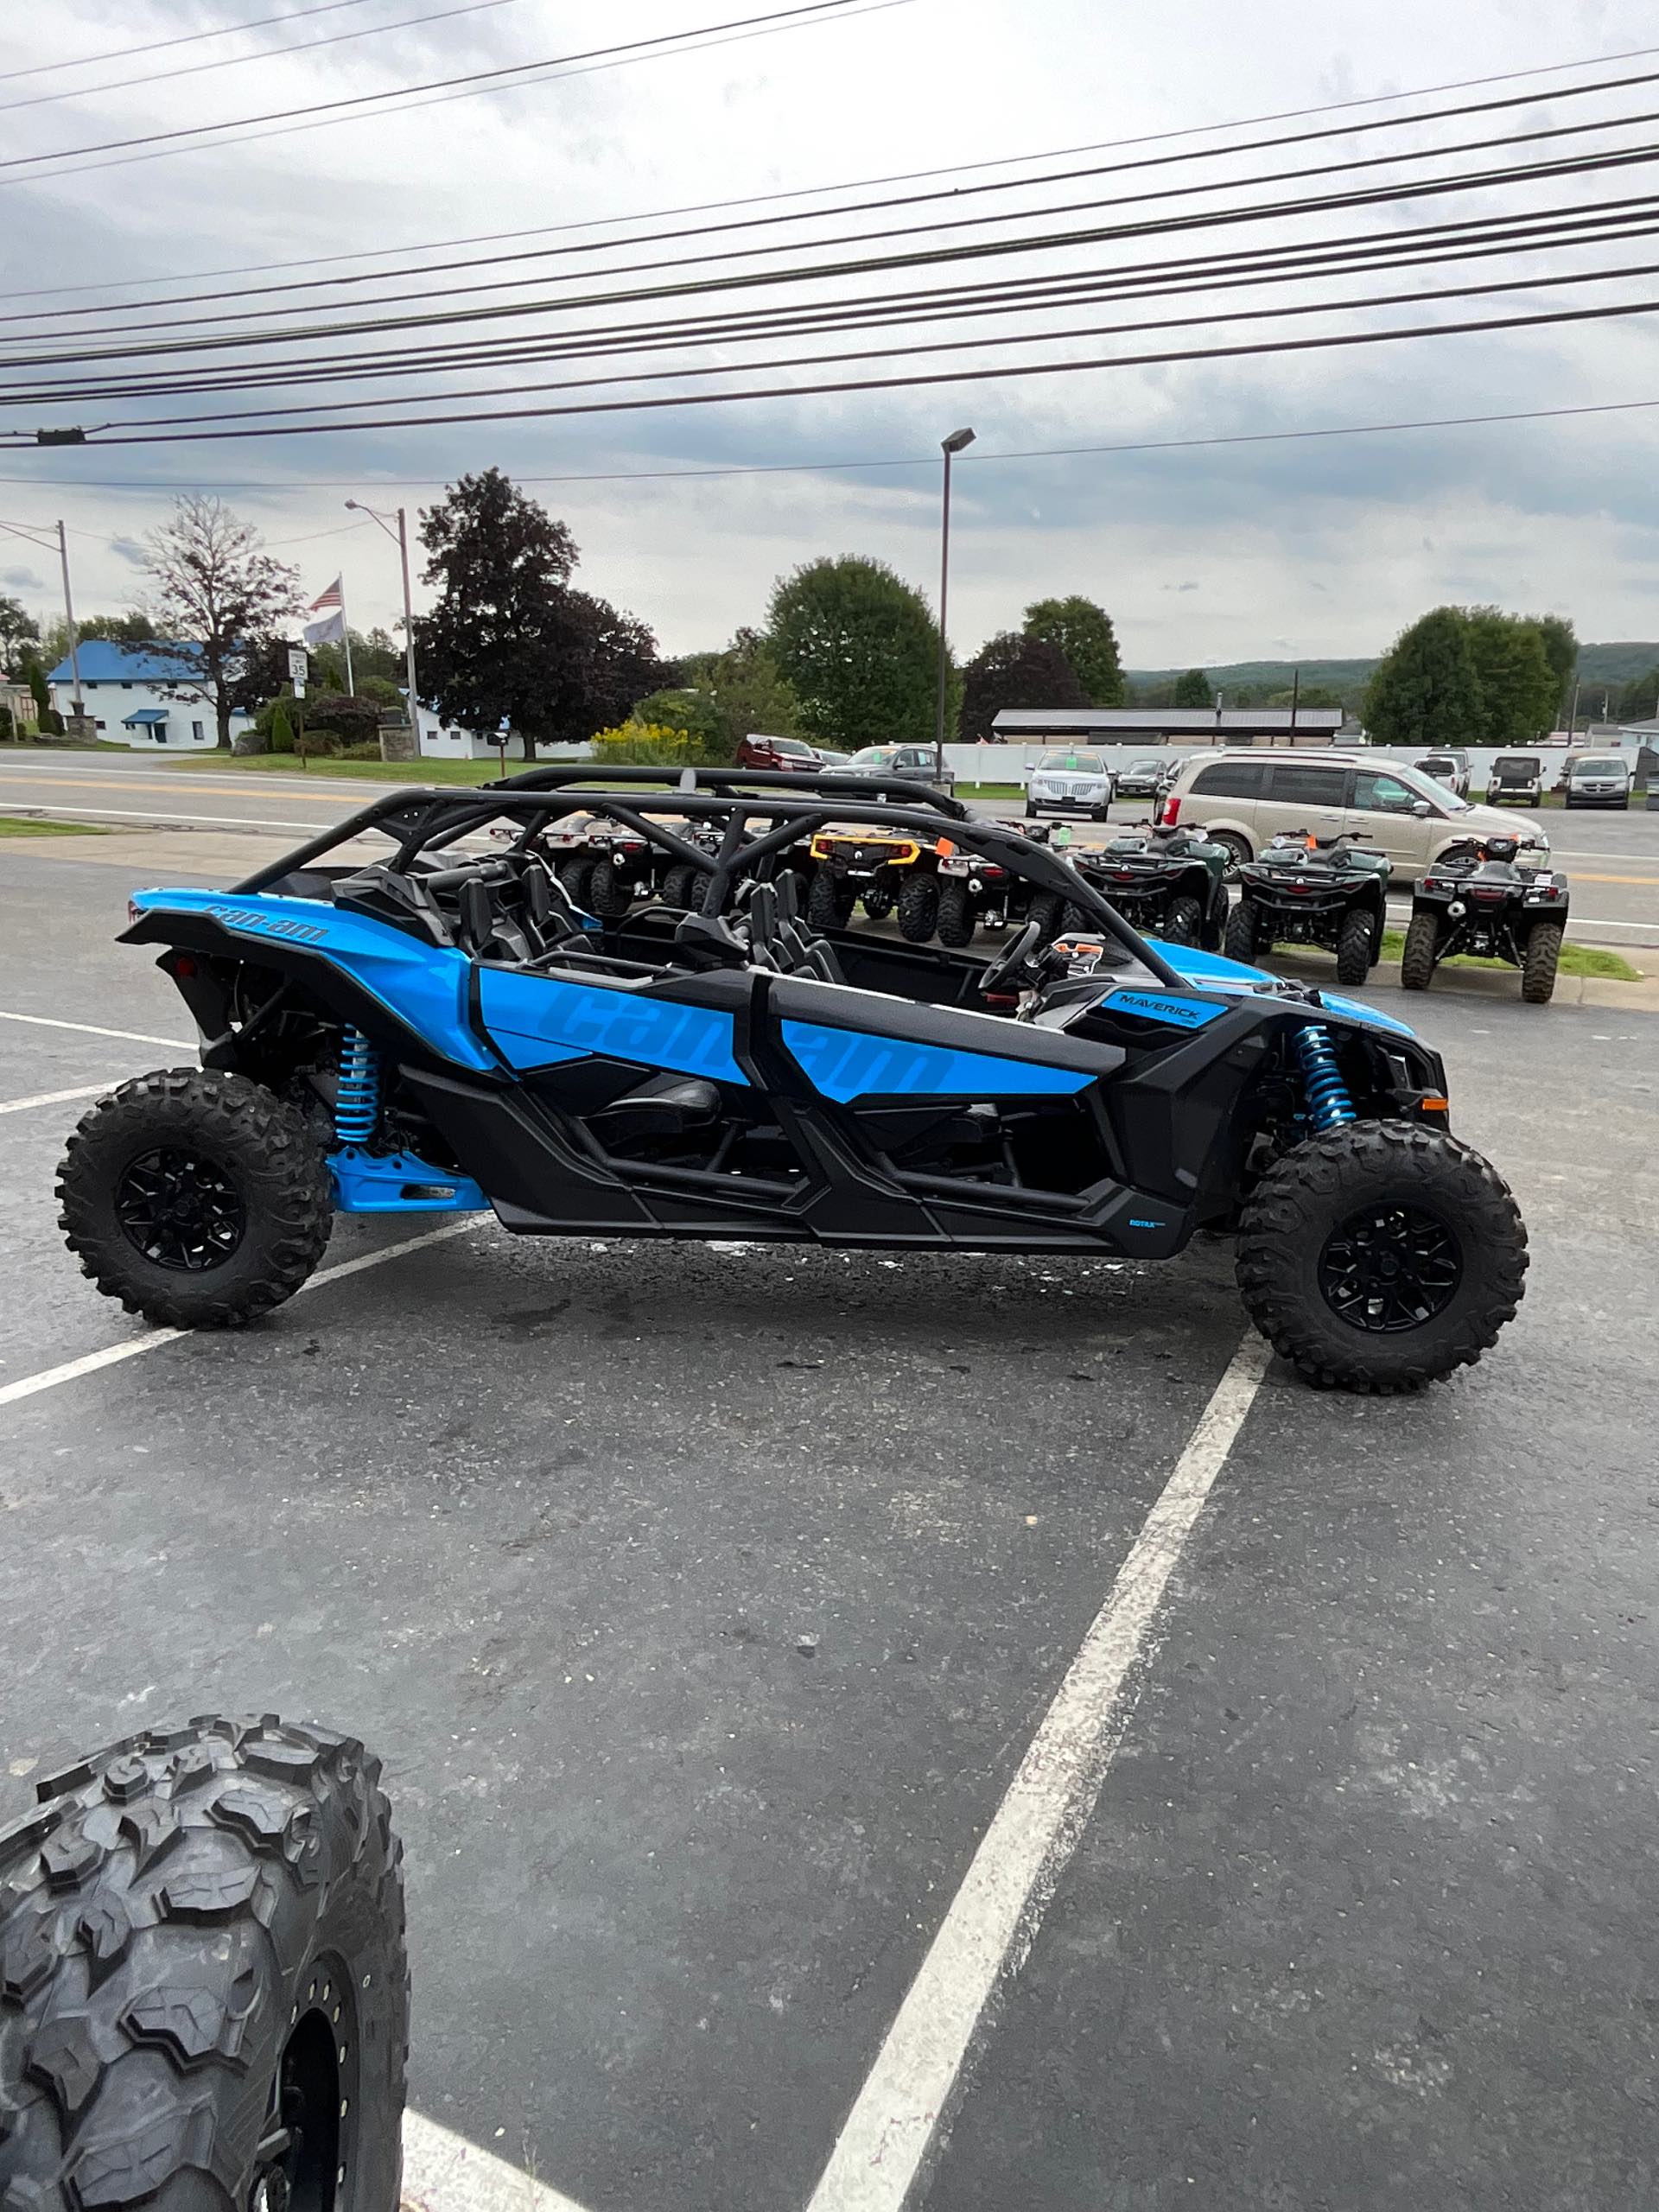 2023 Can-Am Maverick X3 MAX DS TURBO 64 at Leisure Time Powersports of Corry